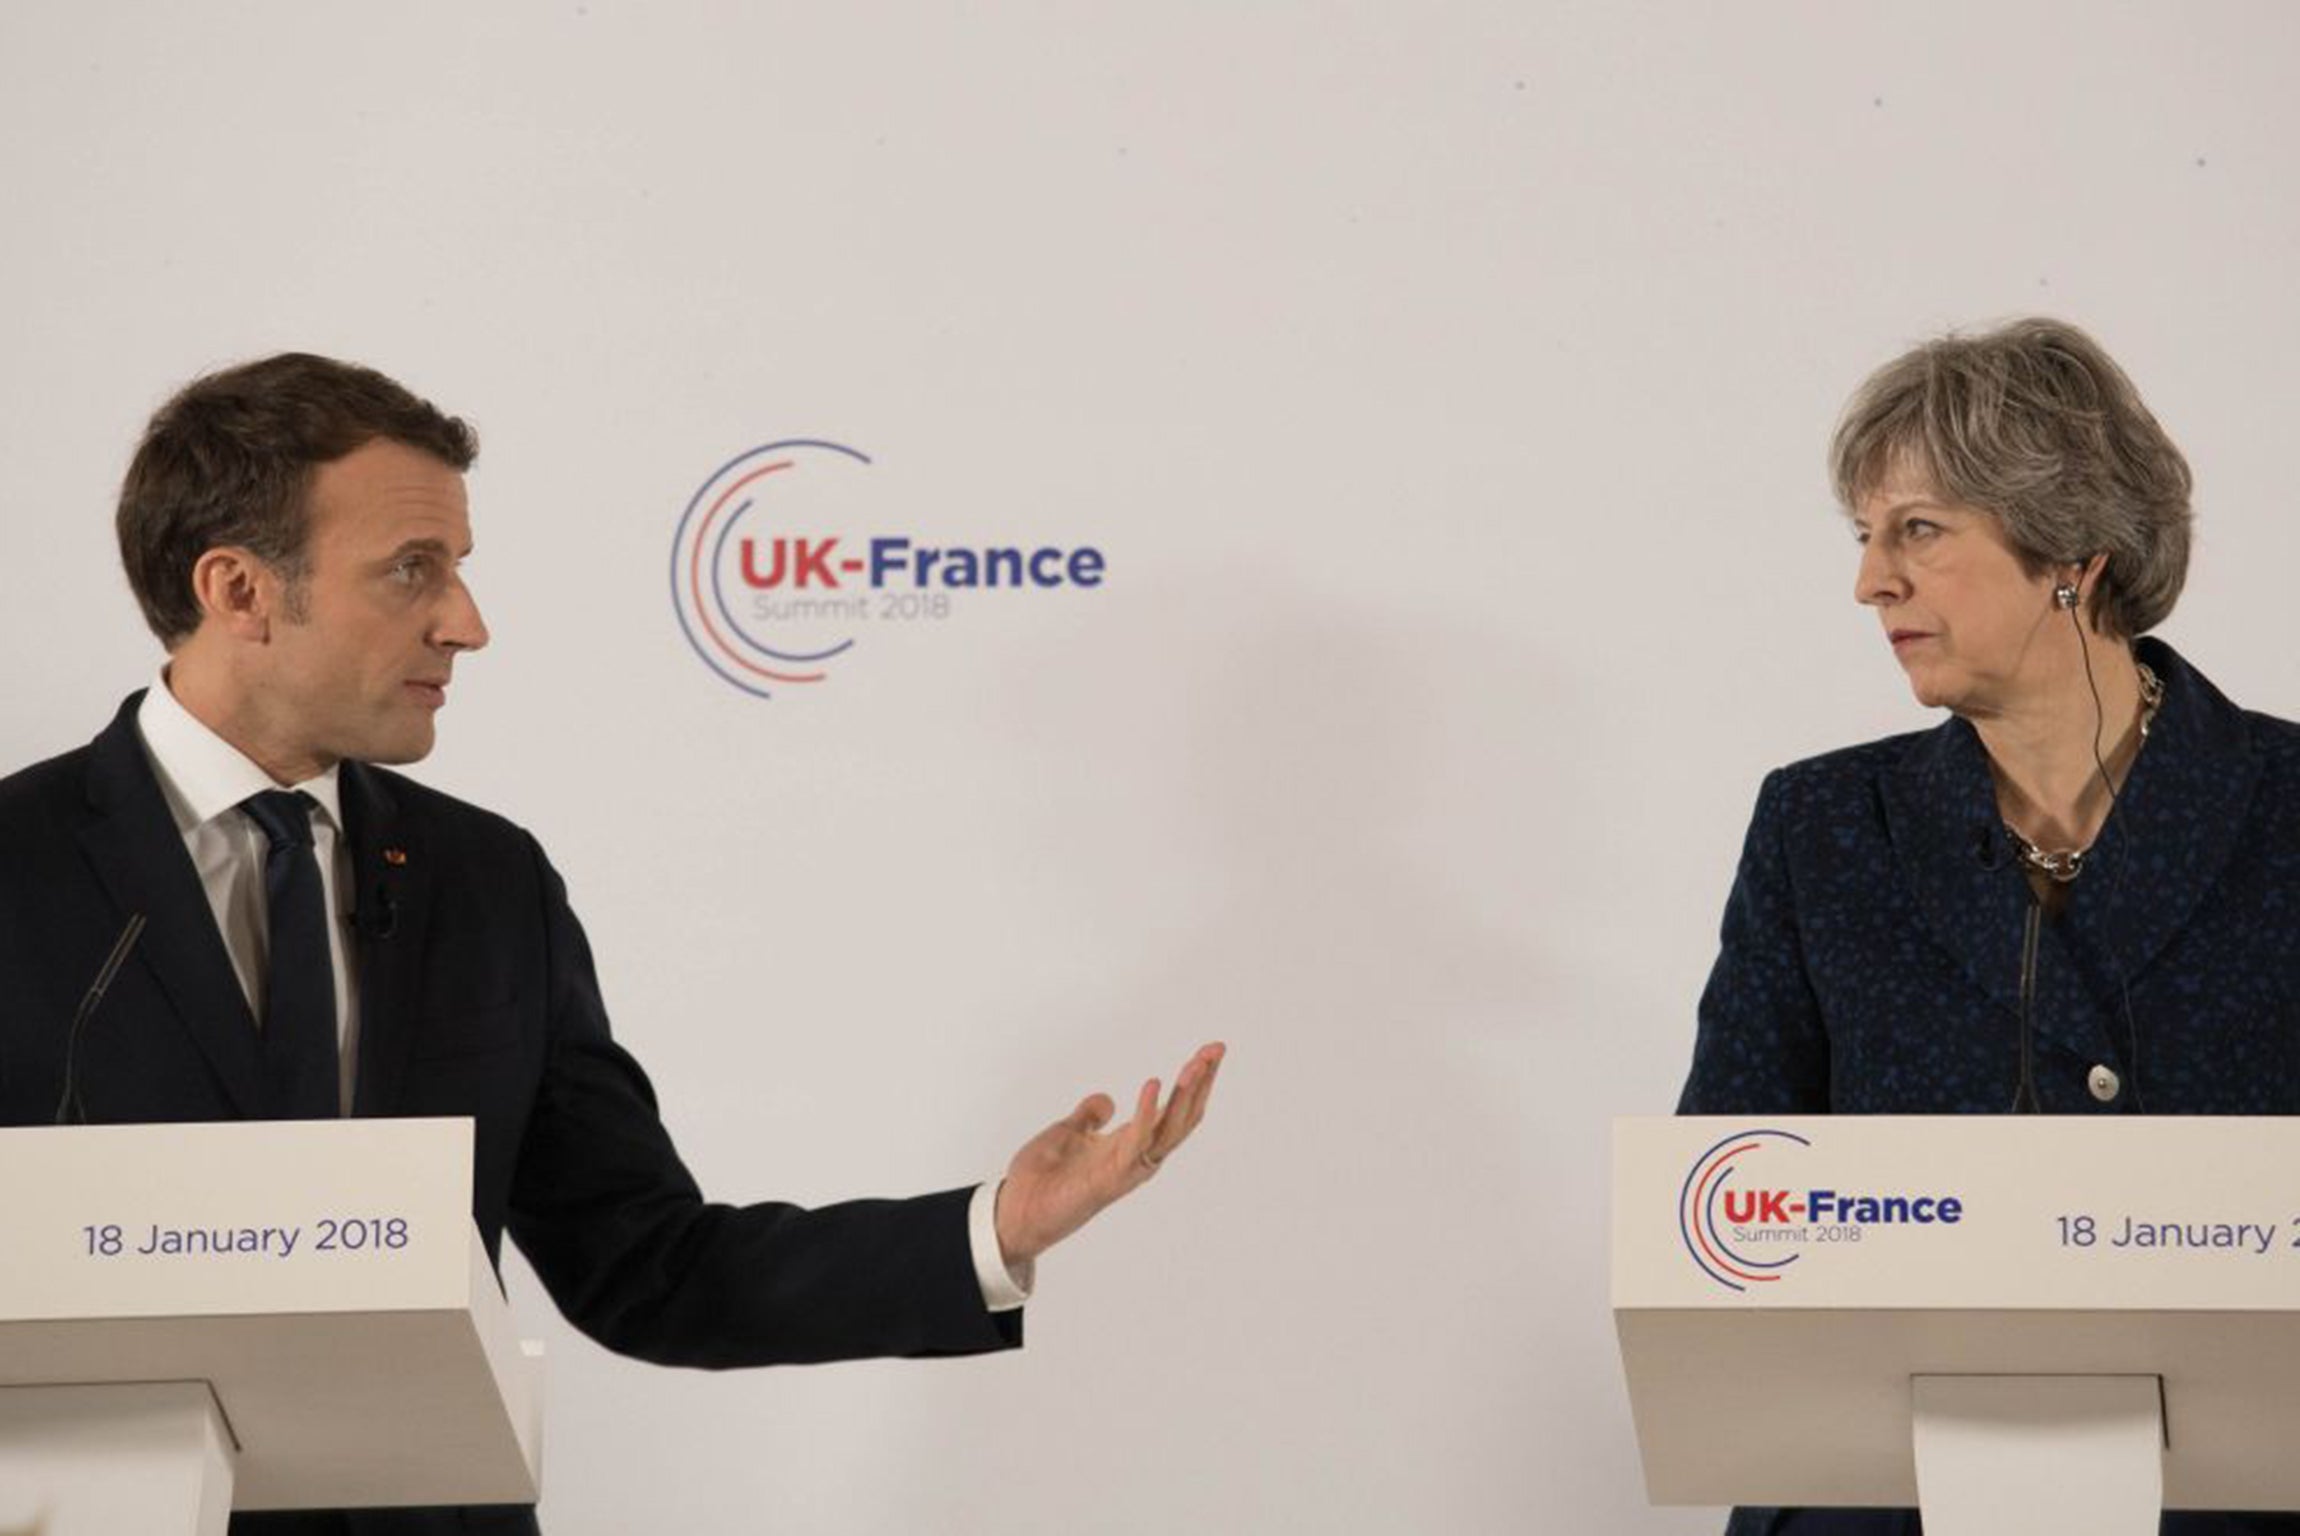 &#13;
The comments came after Theresa May and Emmanuel Macron attended a UK-France summit &#13;